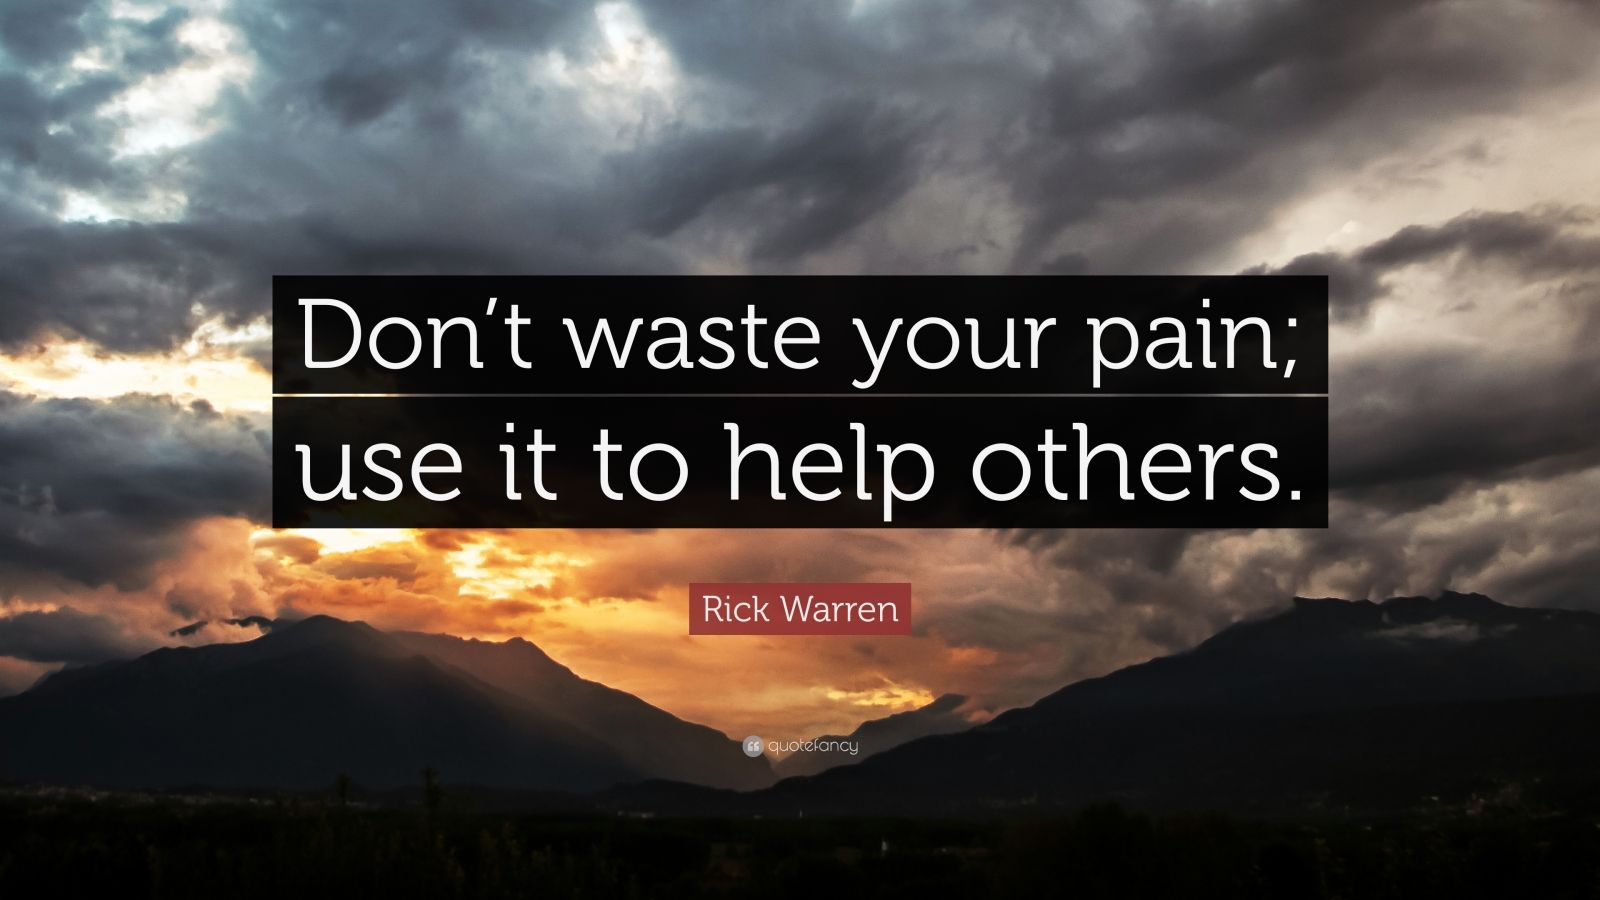 Rick Warren Quote: “Don’t waste your pain; use it to help others.” (12 ...